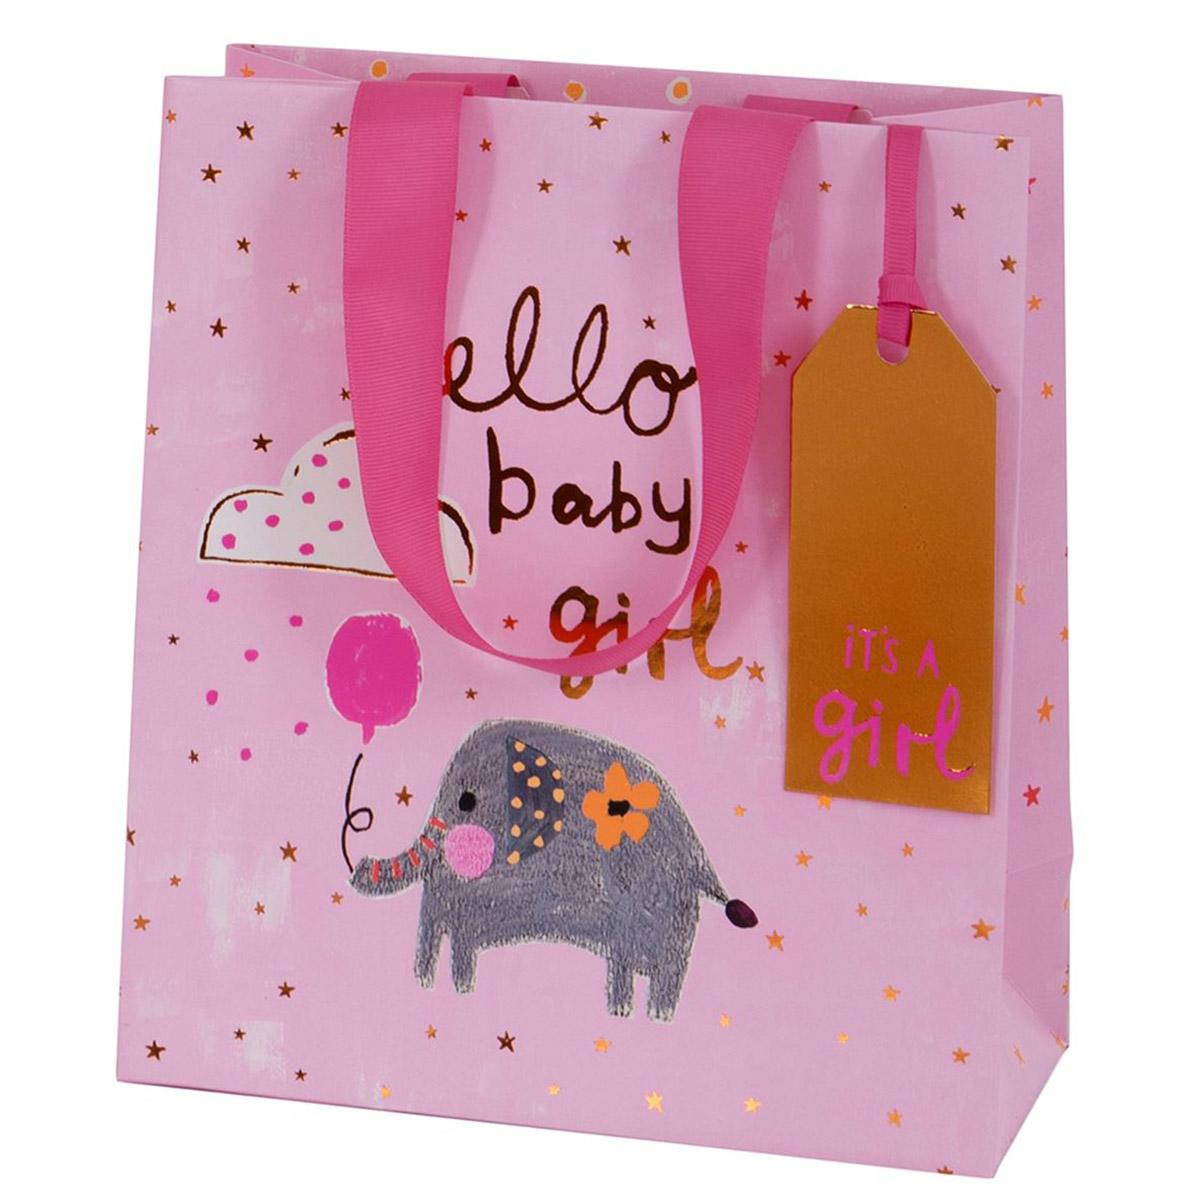 Baby Girl Elephant Themed Gift Bag Complete With Pink Ribbon Handles